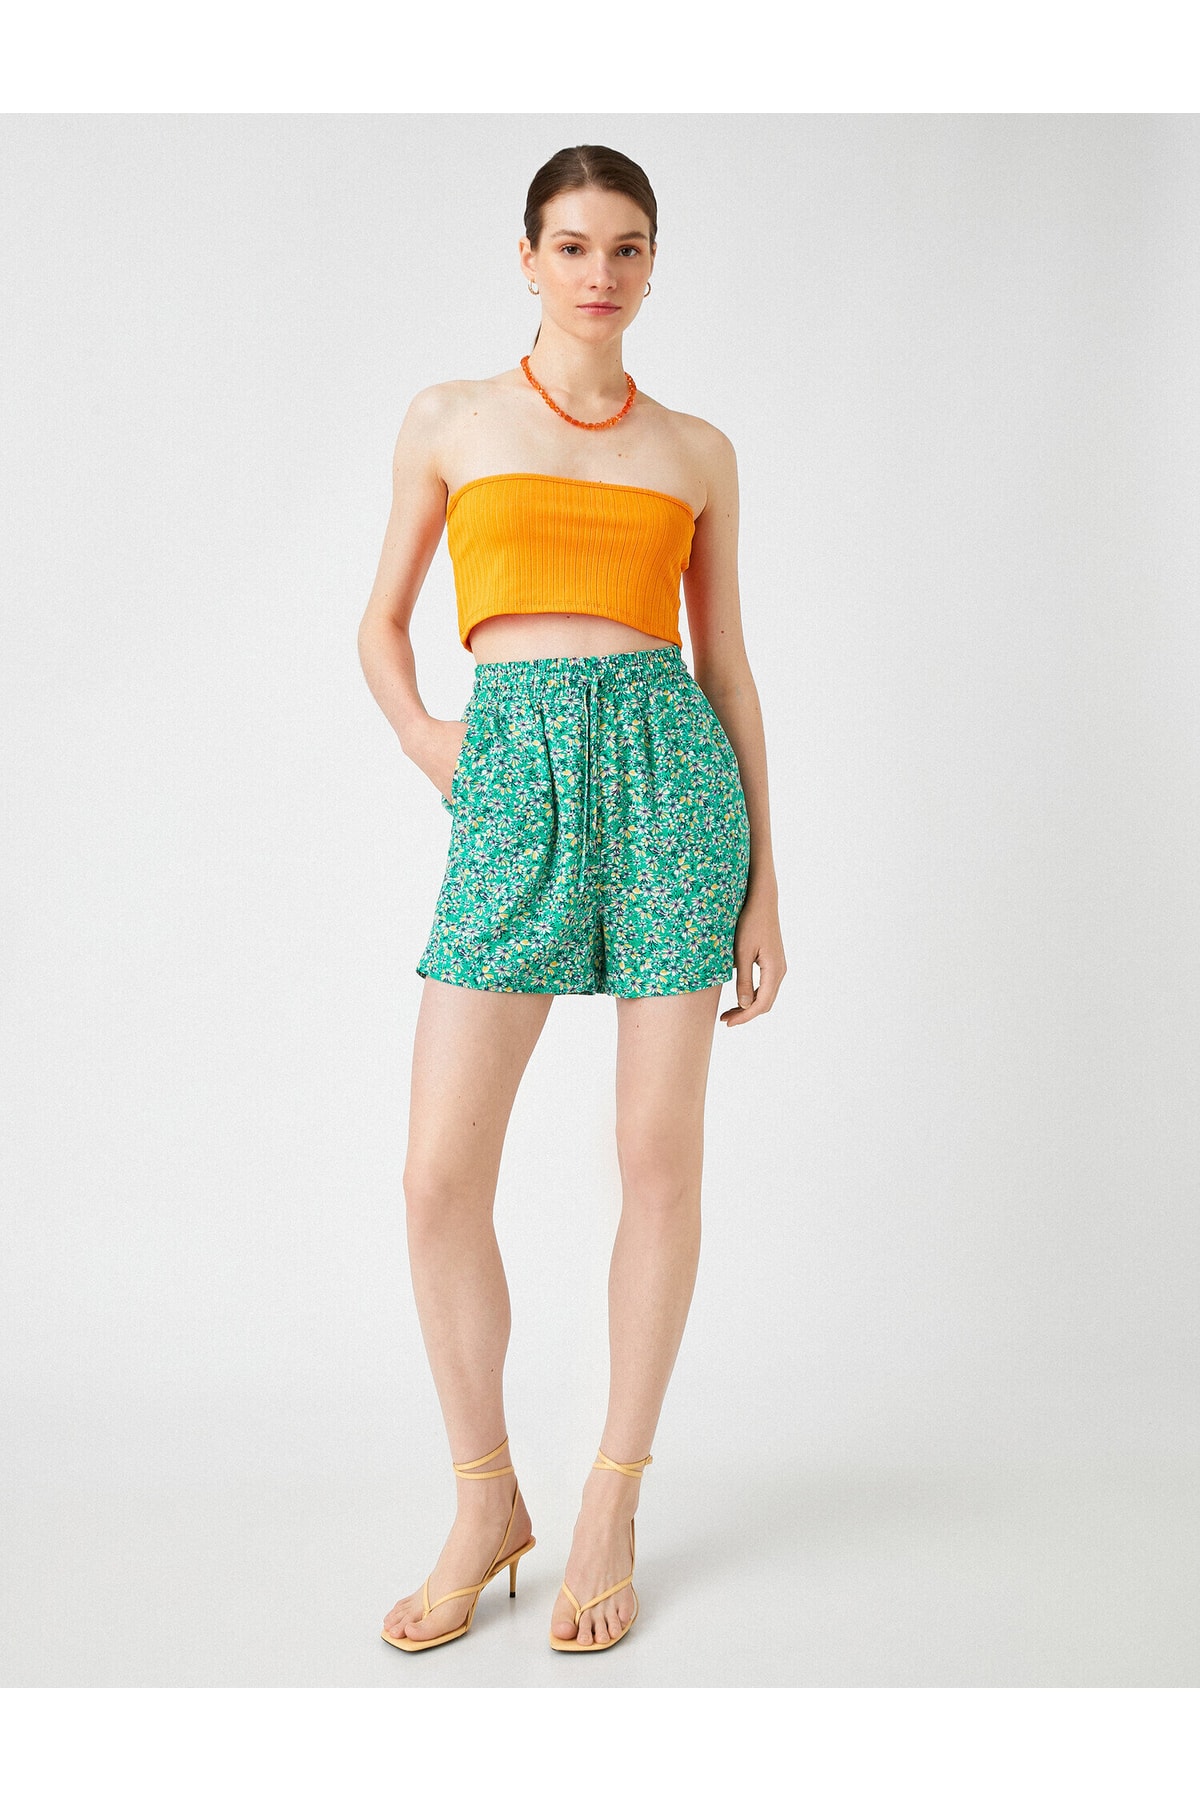 Koton Floral Mini Shorts that are tied at the waist with pockets.